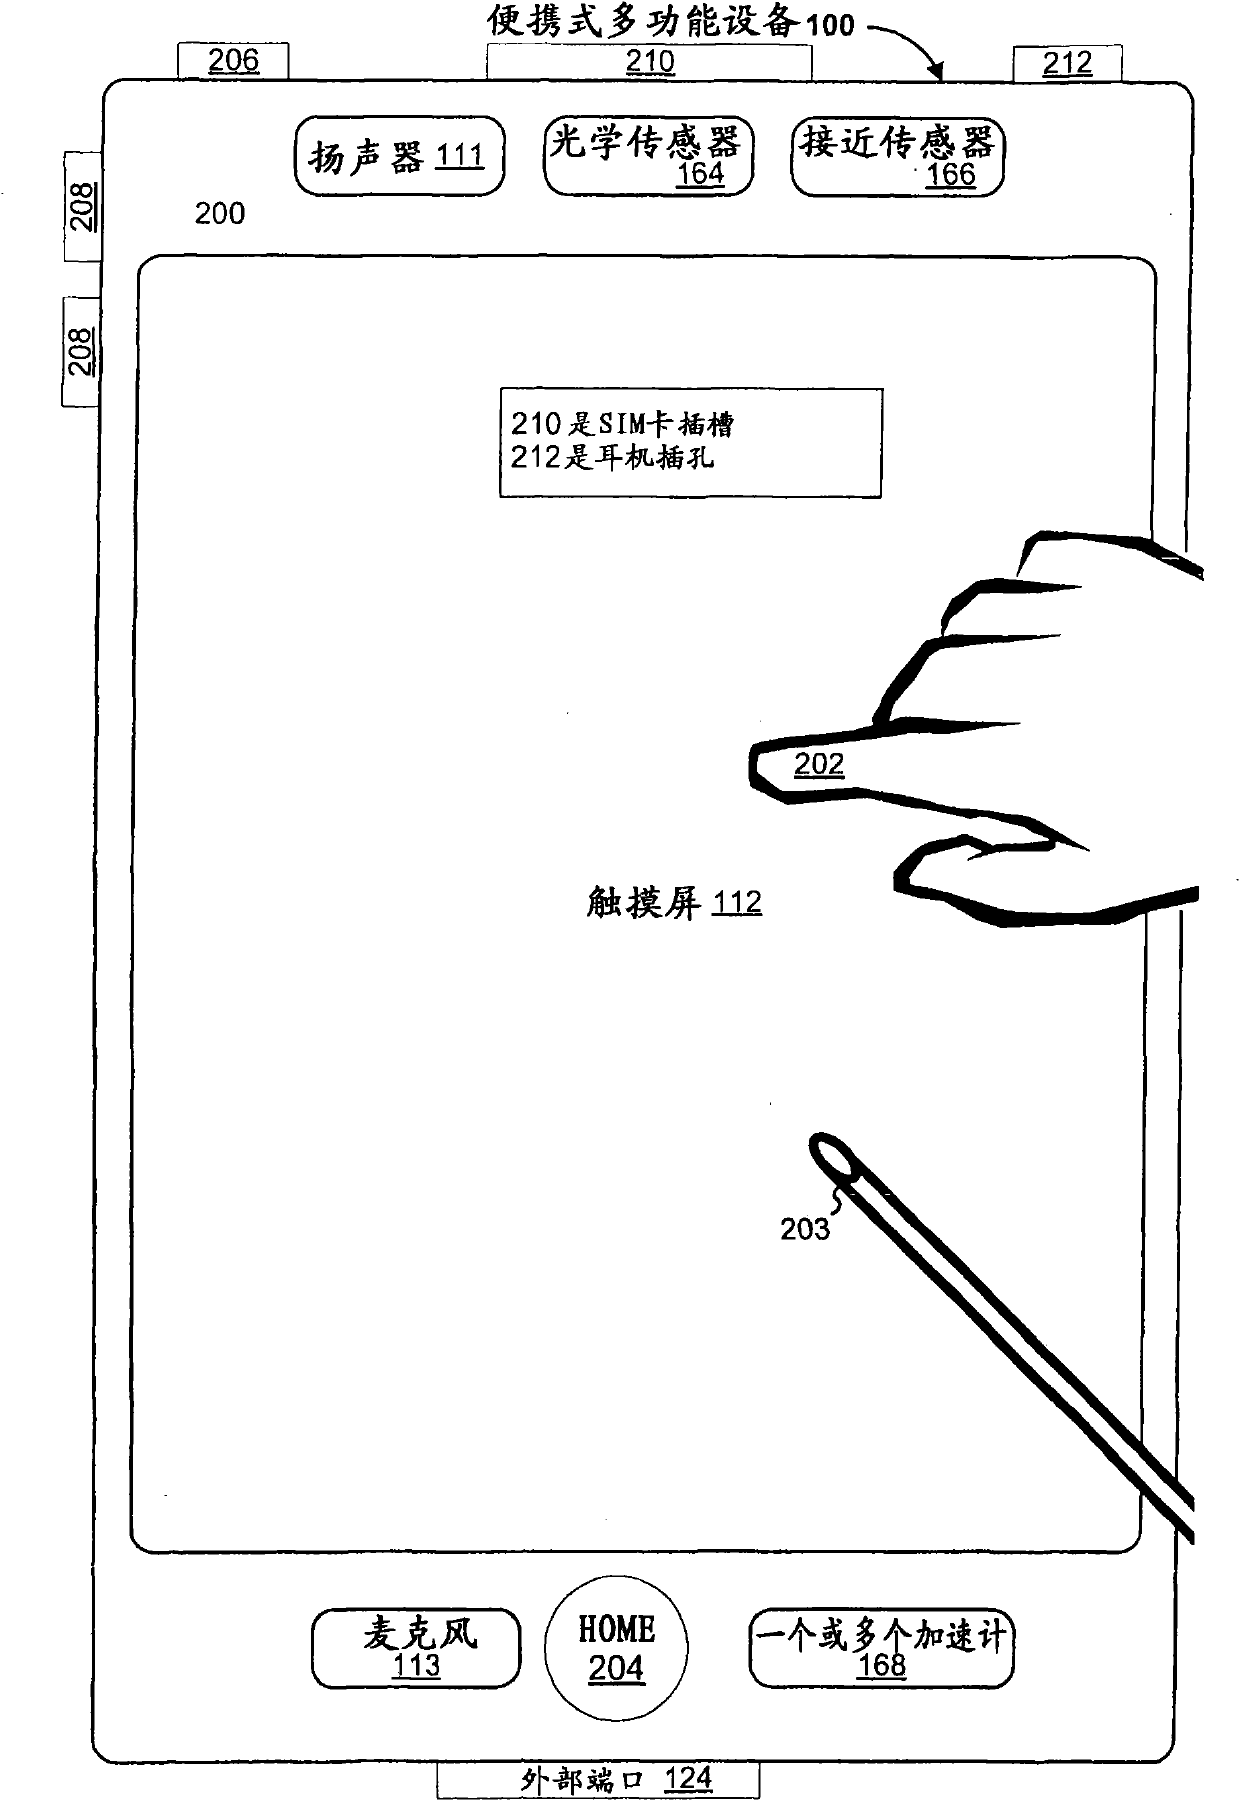 Method and device for scrolling multi-section document and multifunctional device